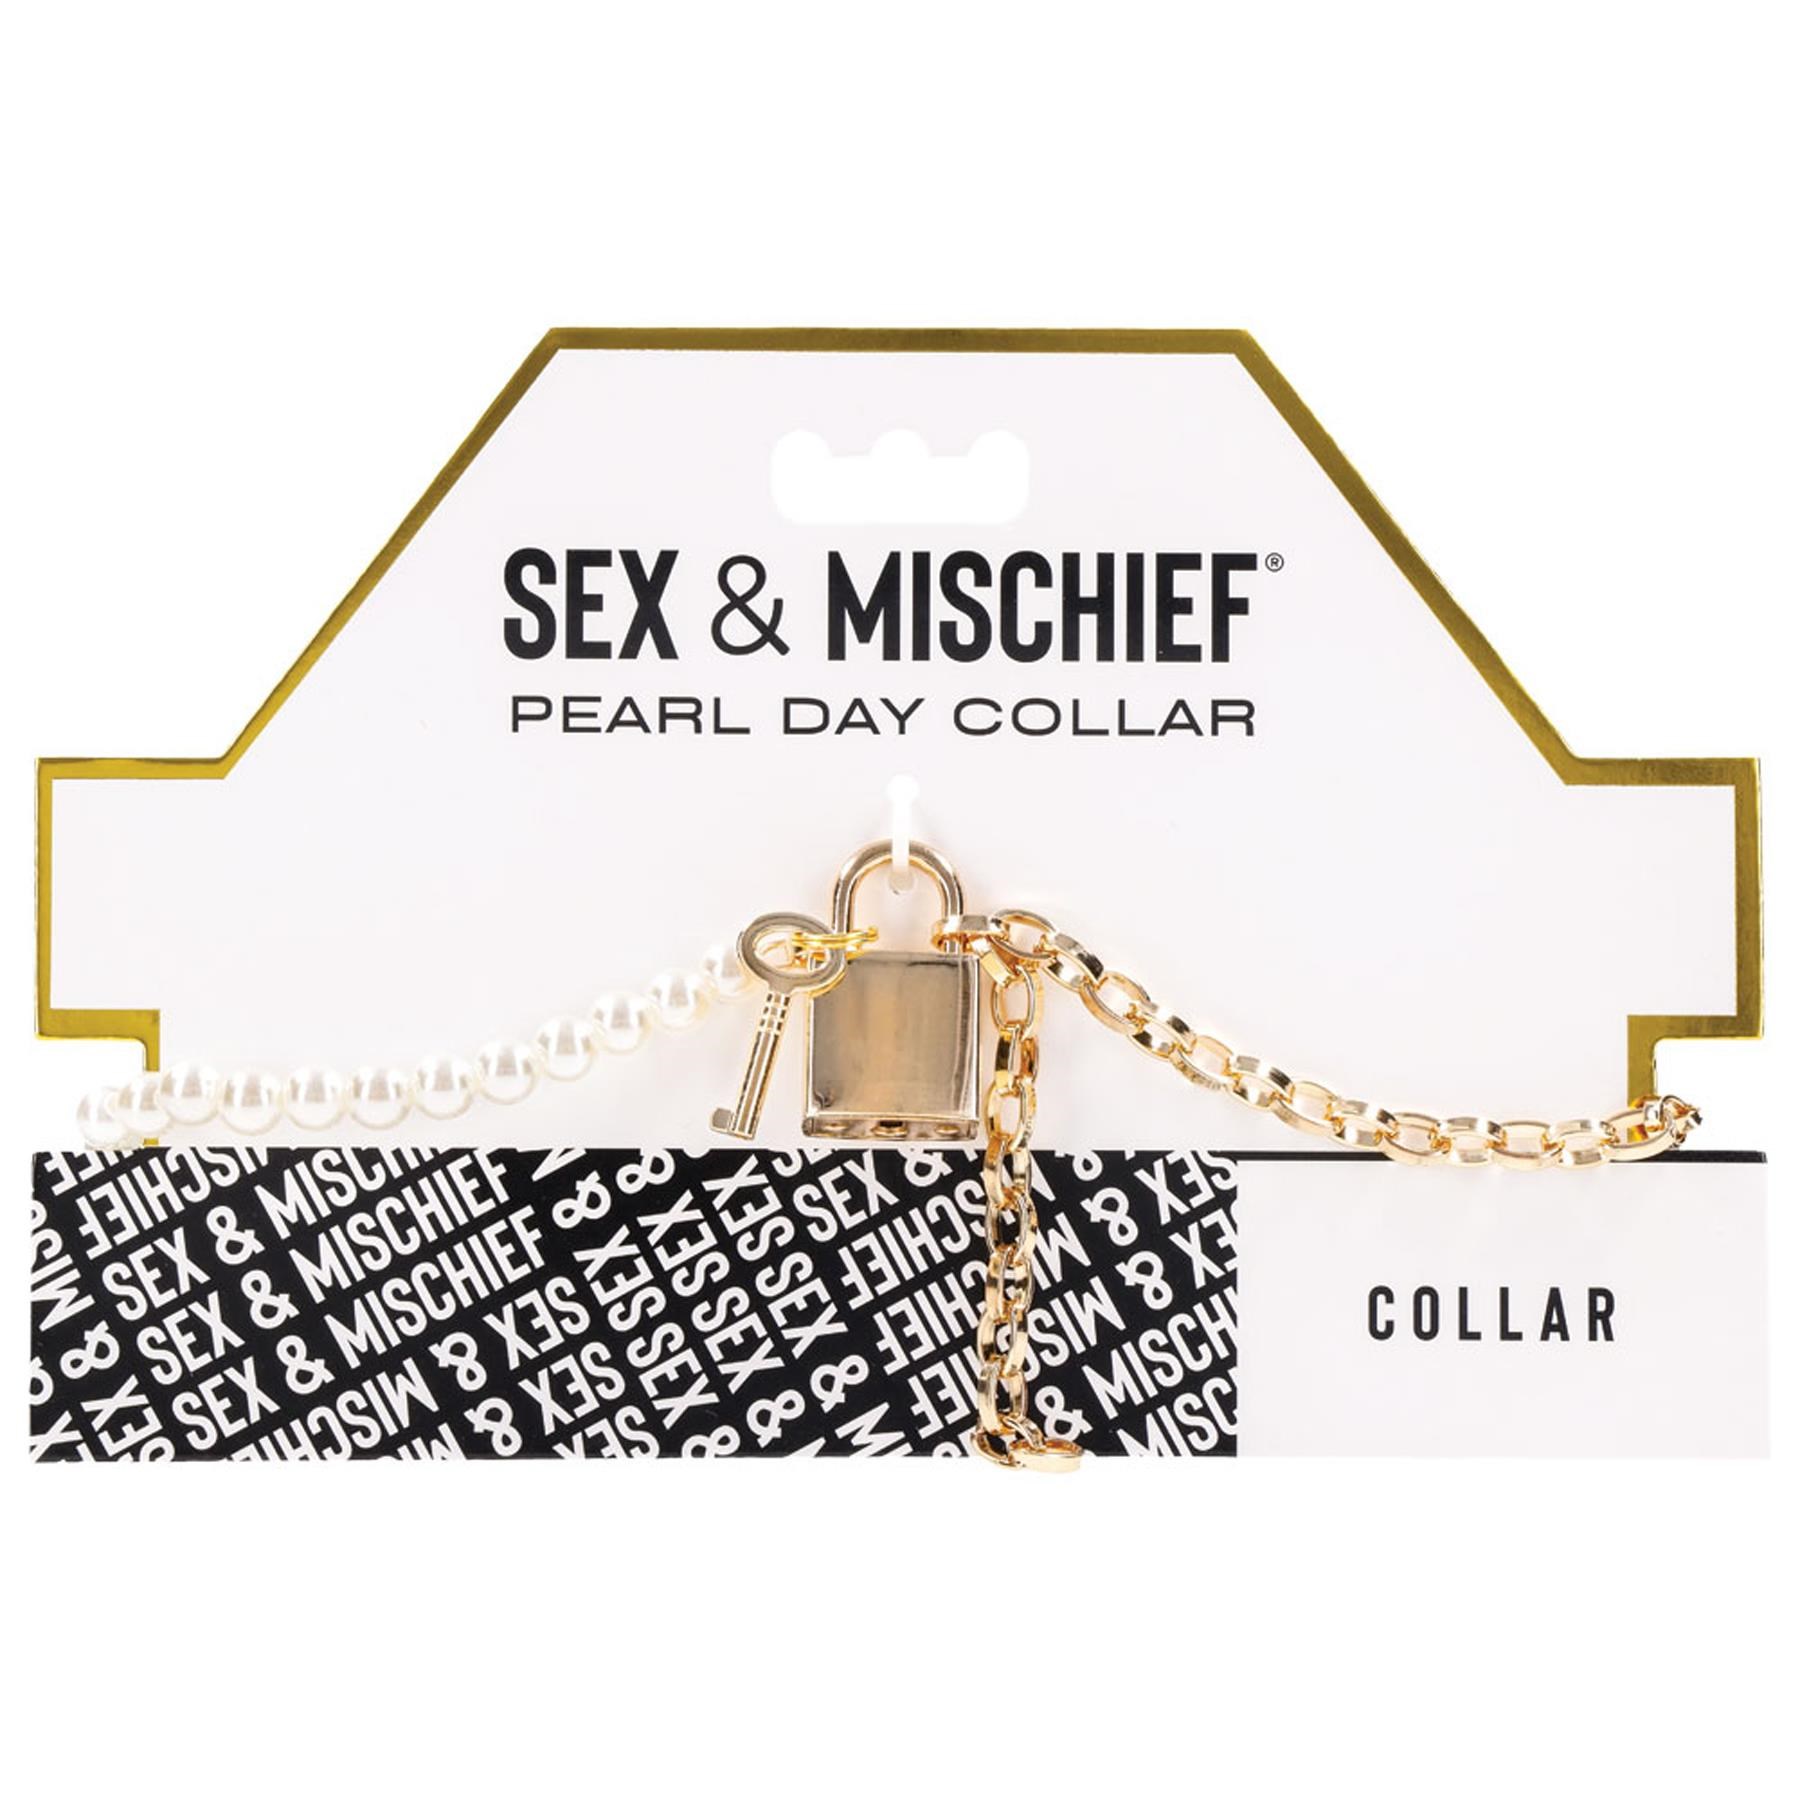 Sex & Mischief Pearl Day Collar - Packaging Shot - Front